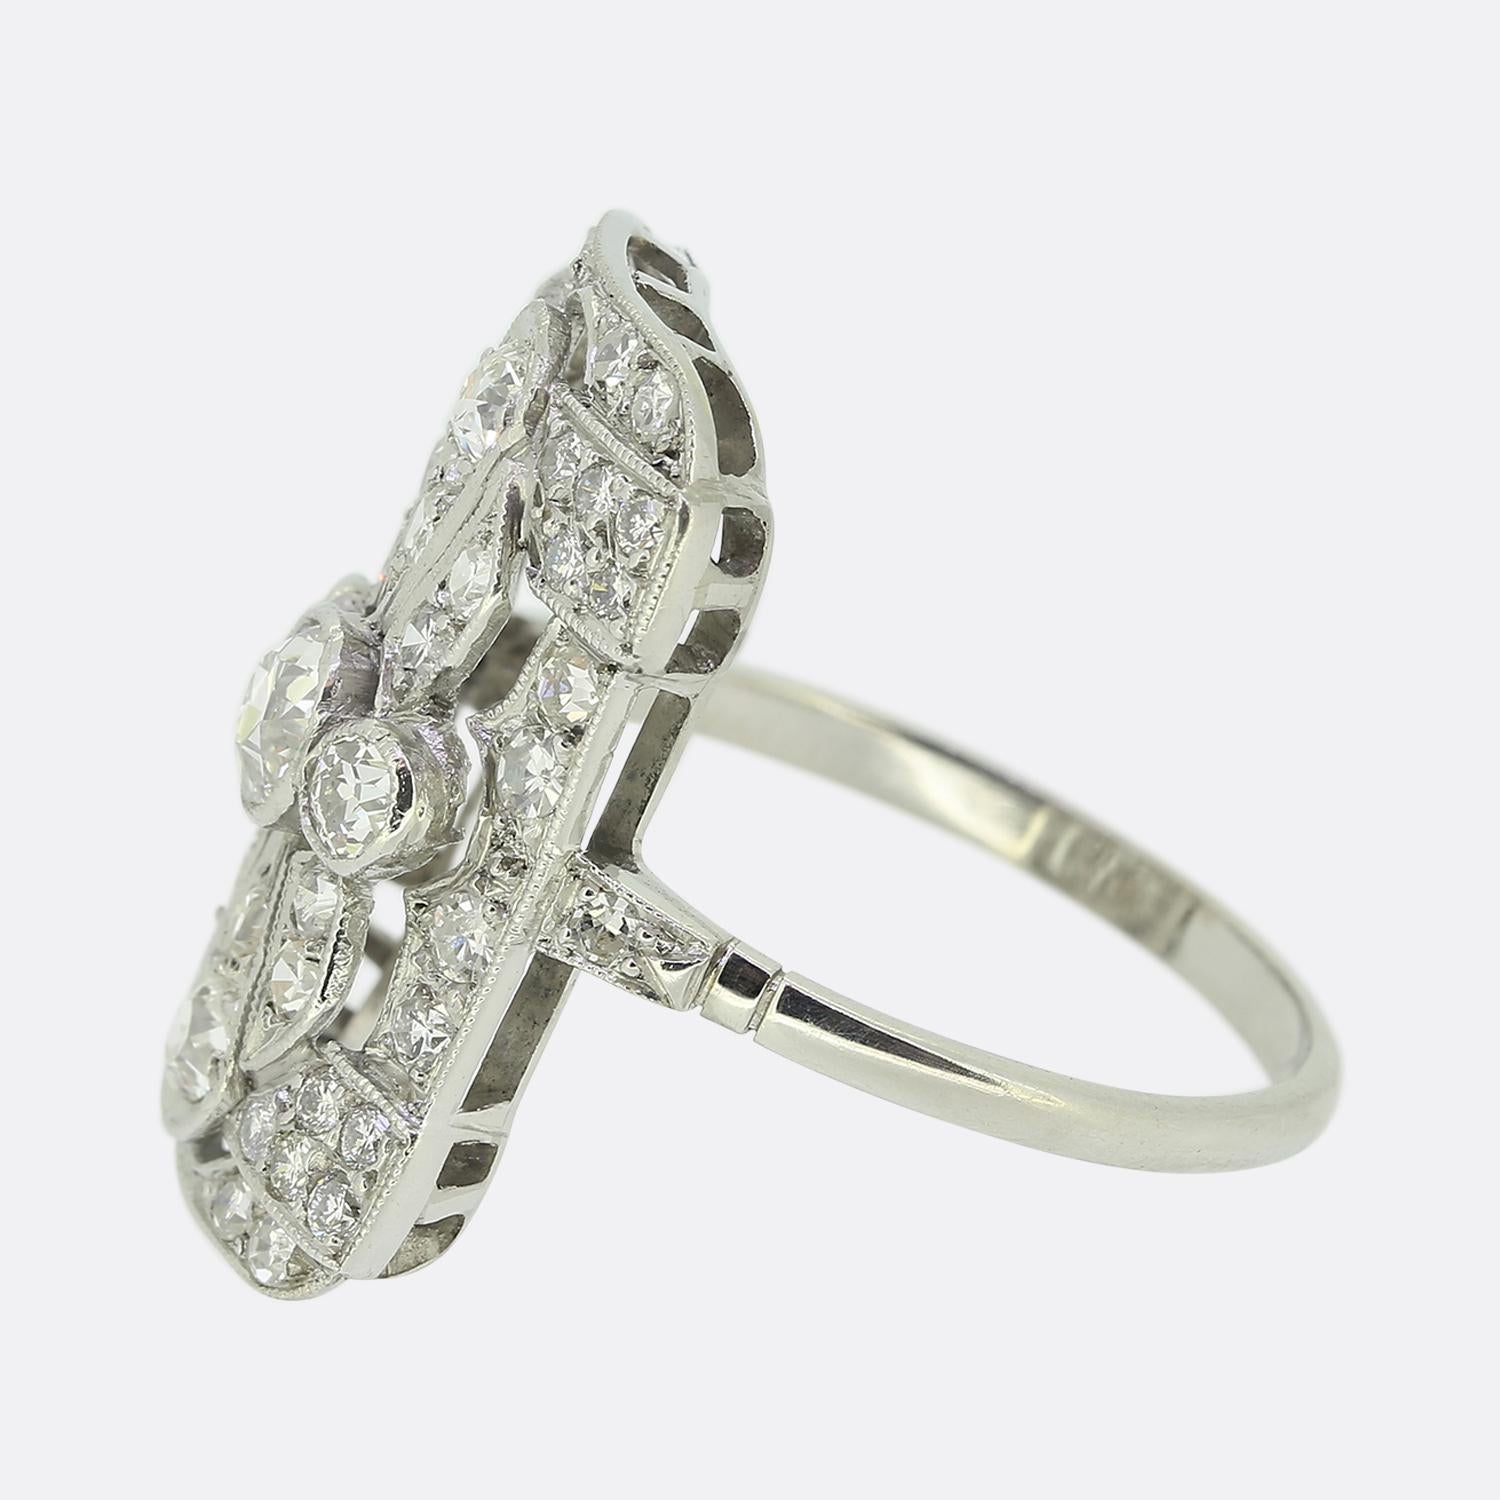 Here we have a stunning diamond tablet ring crafted at a time when the Art Deco style was at the height of design. This ornate platinum piece showcases a rectangular shaped face boasting a multiple layered design consisting of various milgrain